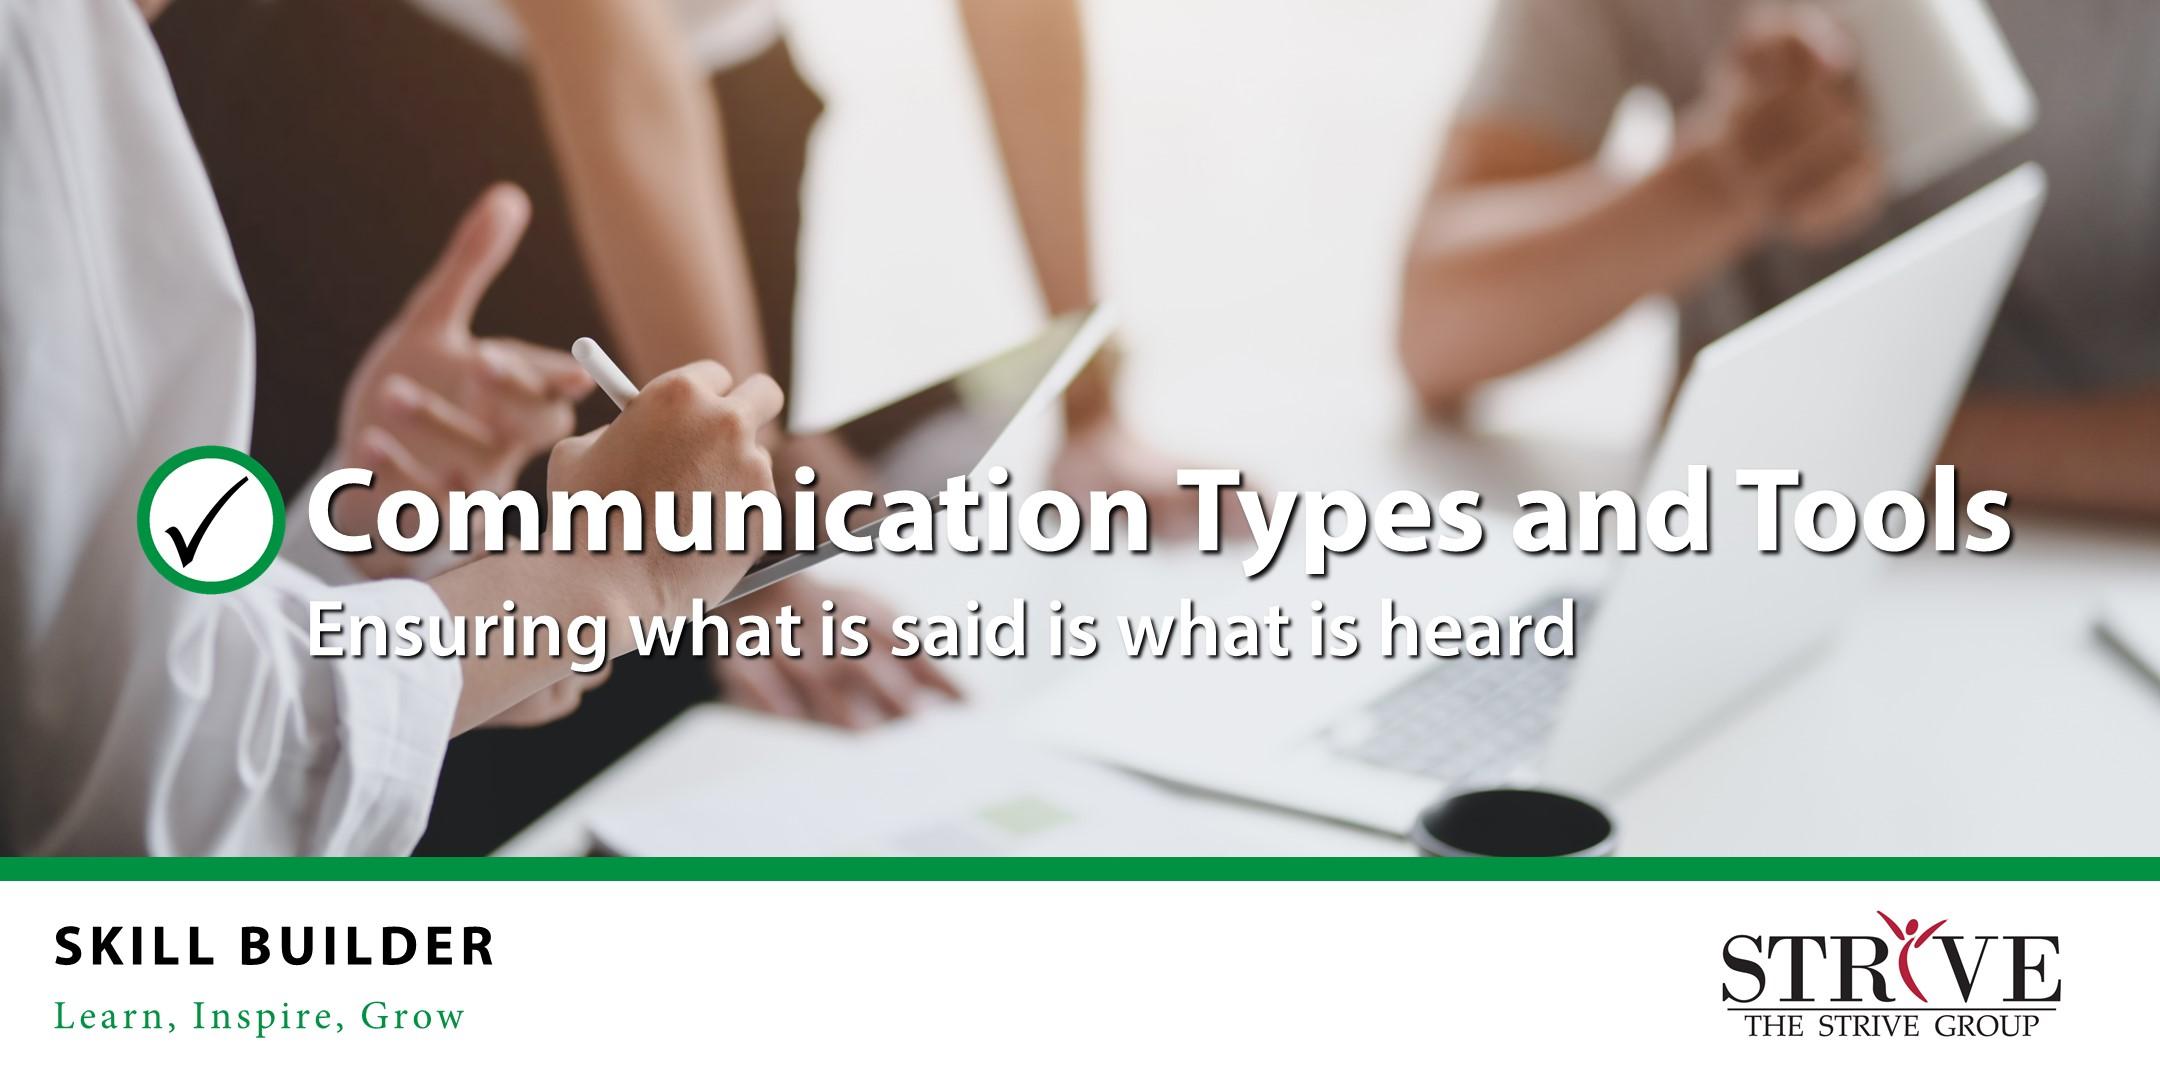 Skill Builder: Communication Types and Tools